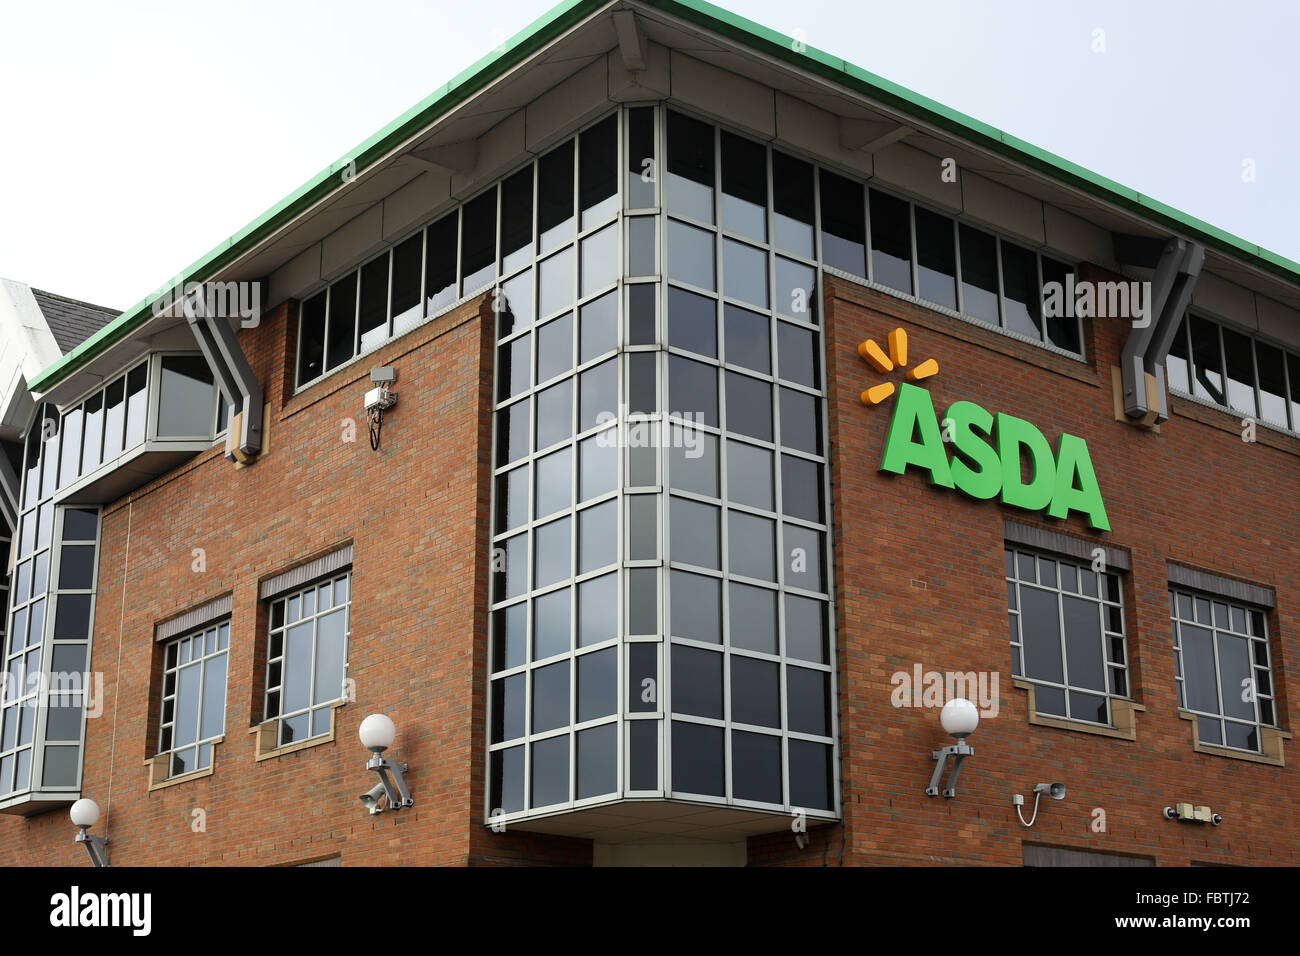 Asda Head Office in Leeds city centre, West Yorkshire UK. Asda's Head Office, ASDA House, is based in the centre of Leeds. Stock Photo